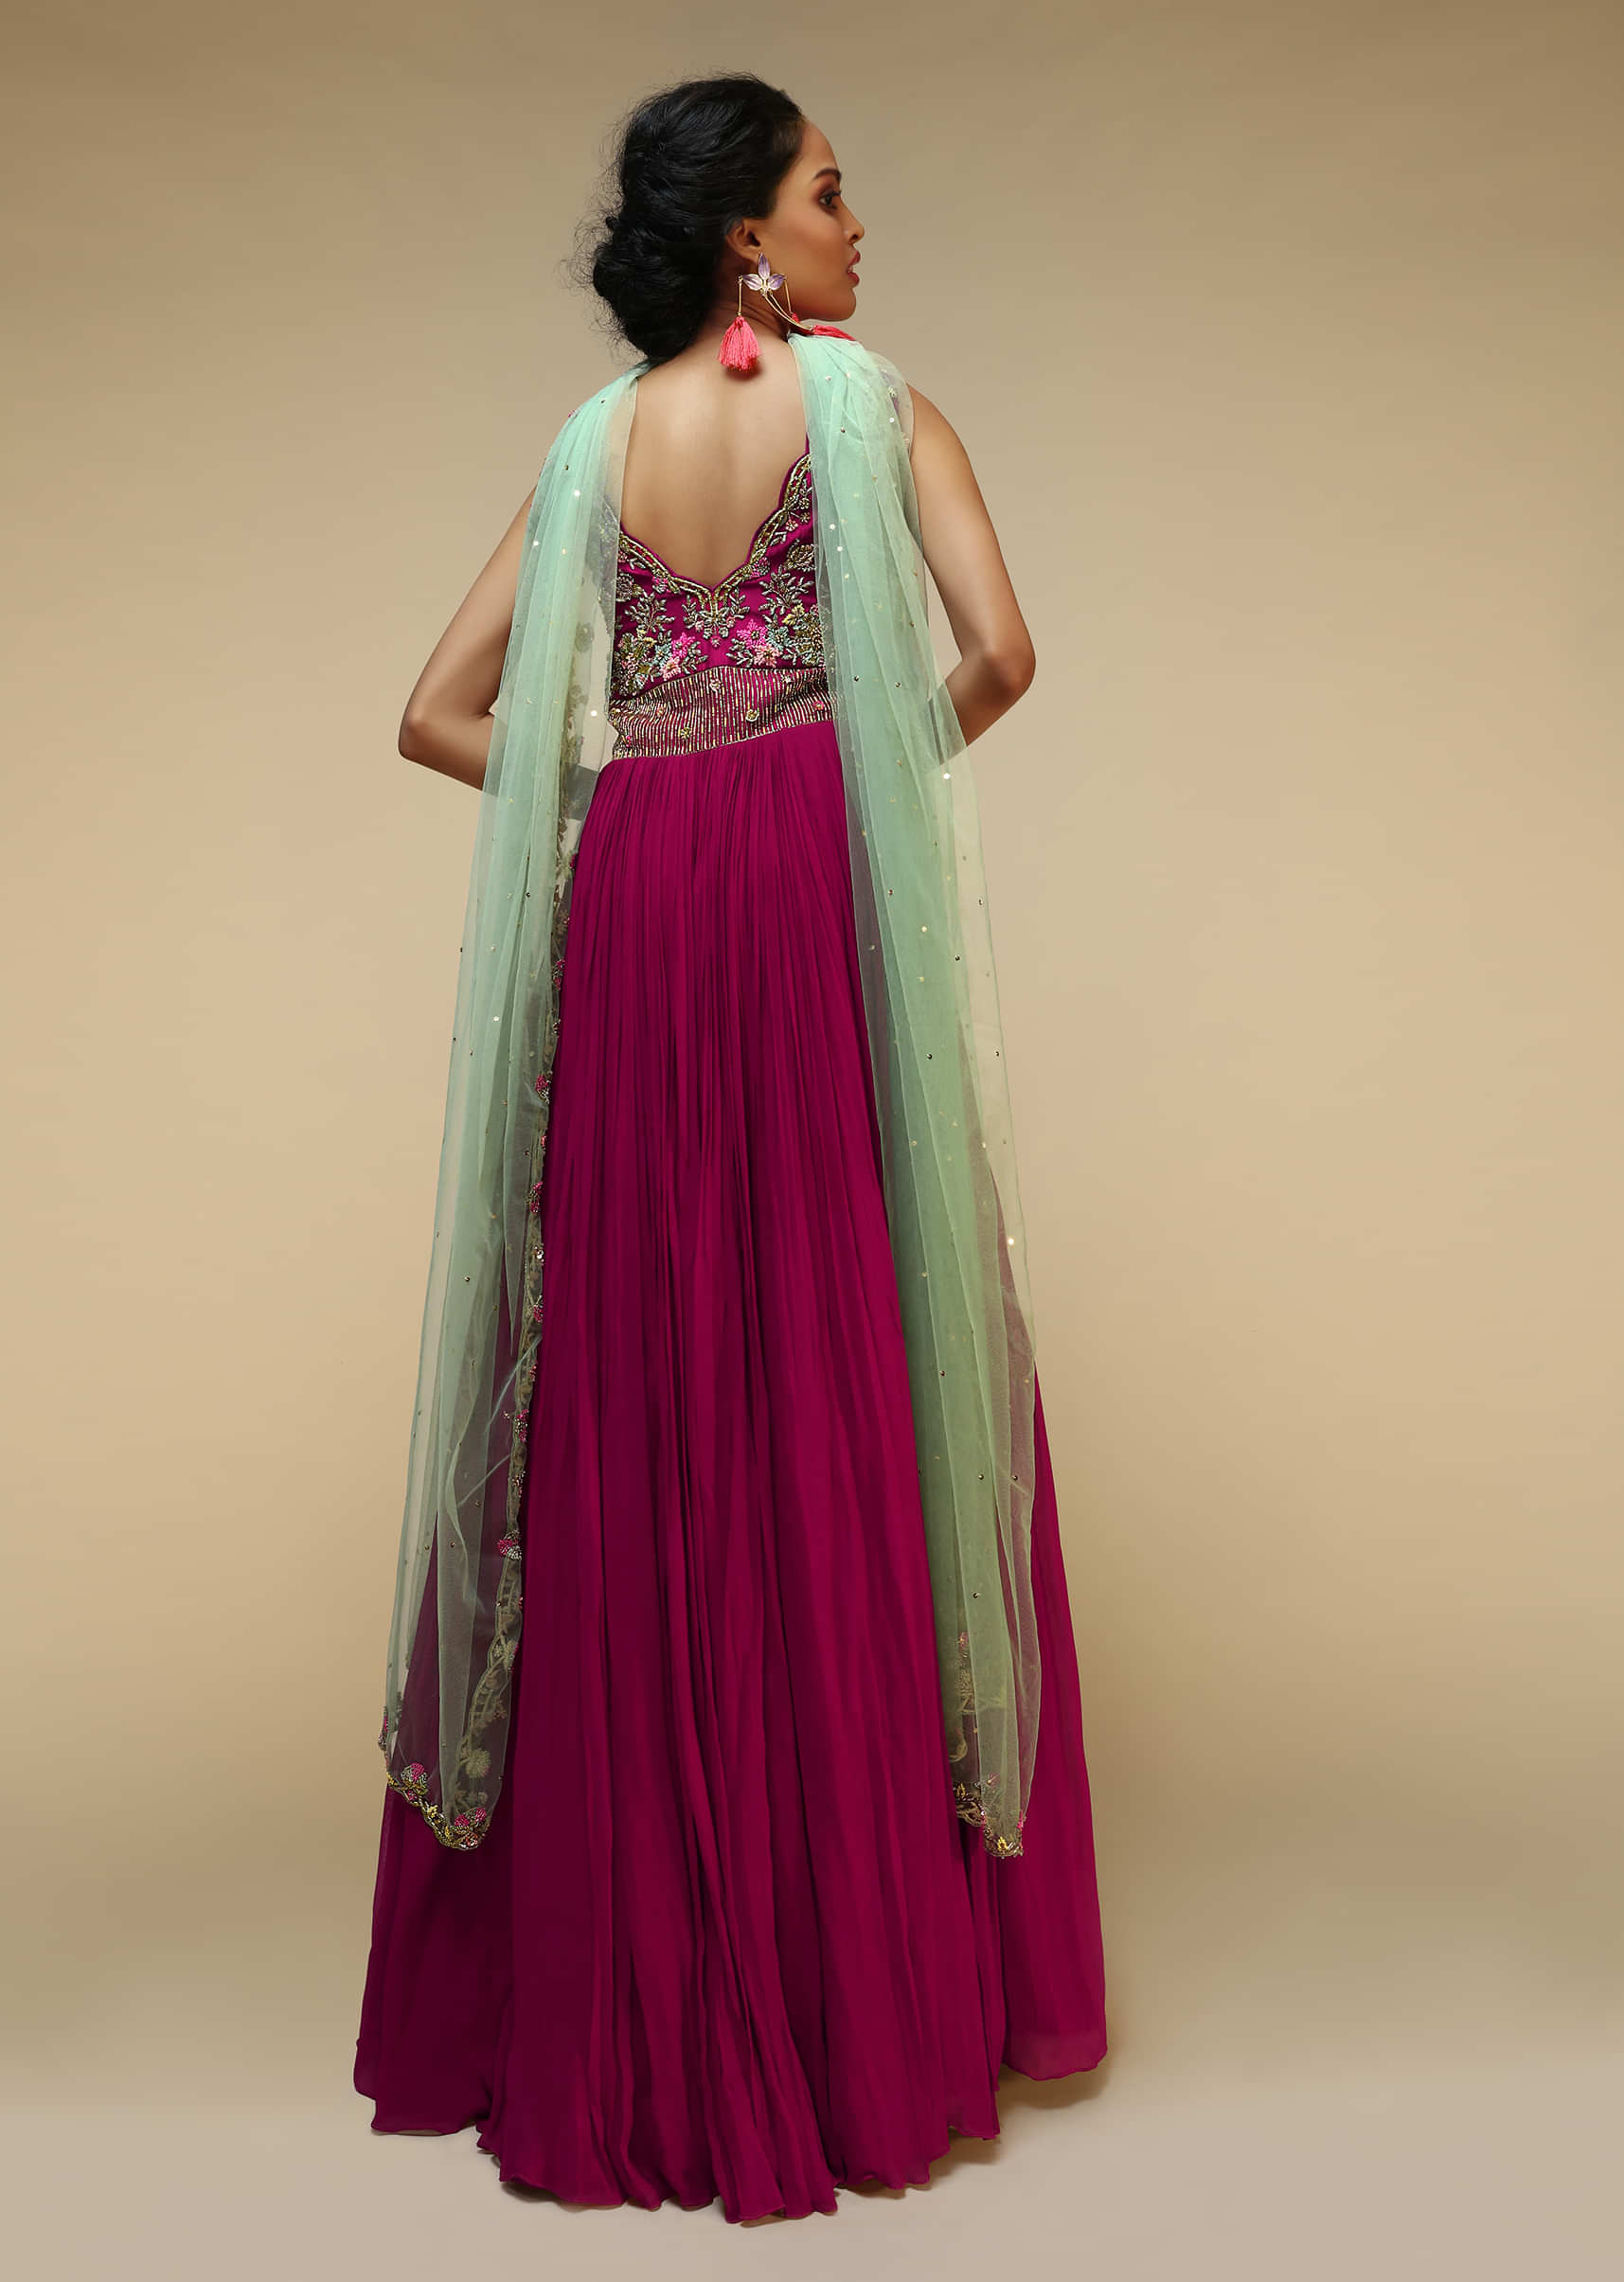 Wine Anarkali Suit In Georgette With A Heavily Hand Embroidered Bodice Featuring Multi Colored Resham And Beads  